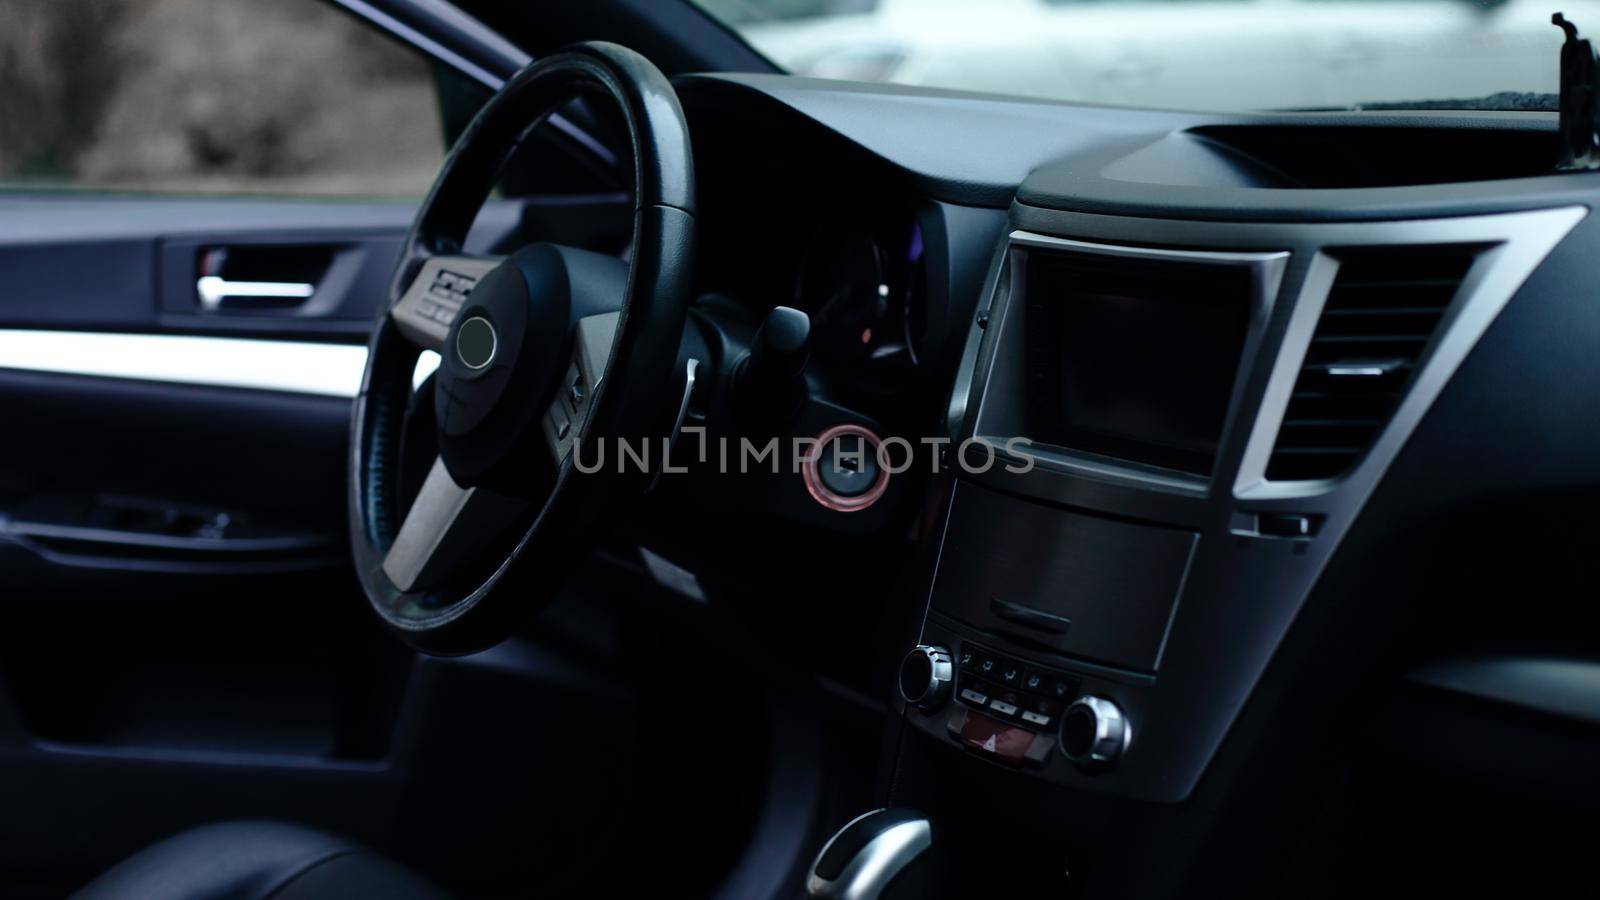 View of the interior of a modern automobile showing the dashboar by SmartPhotoLab